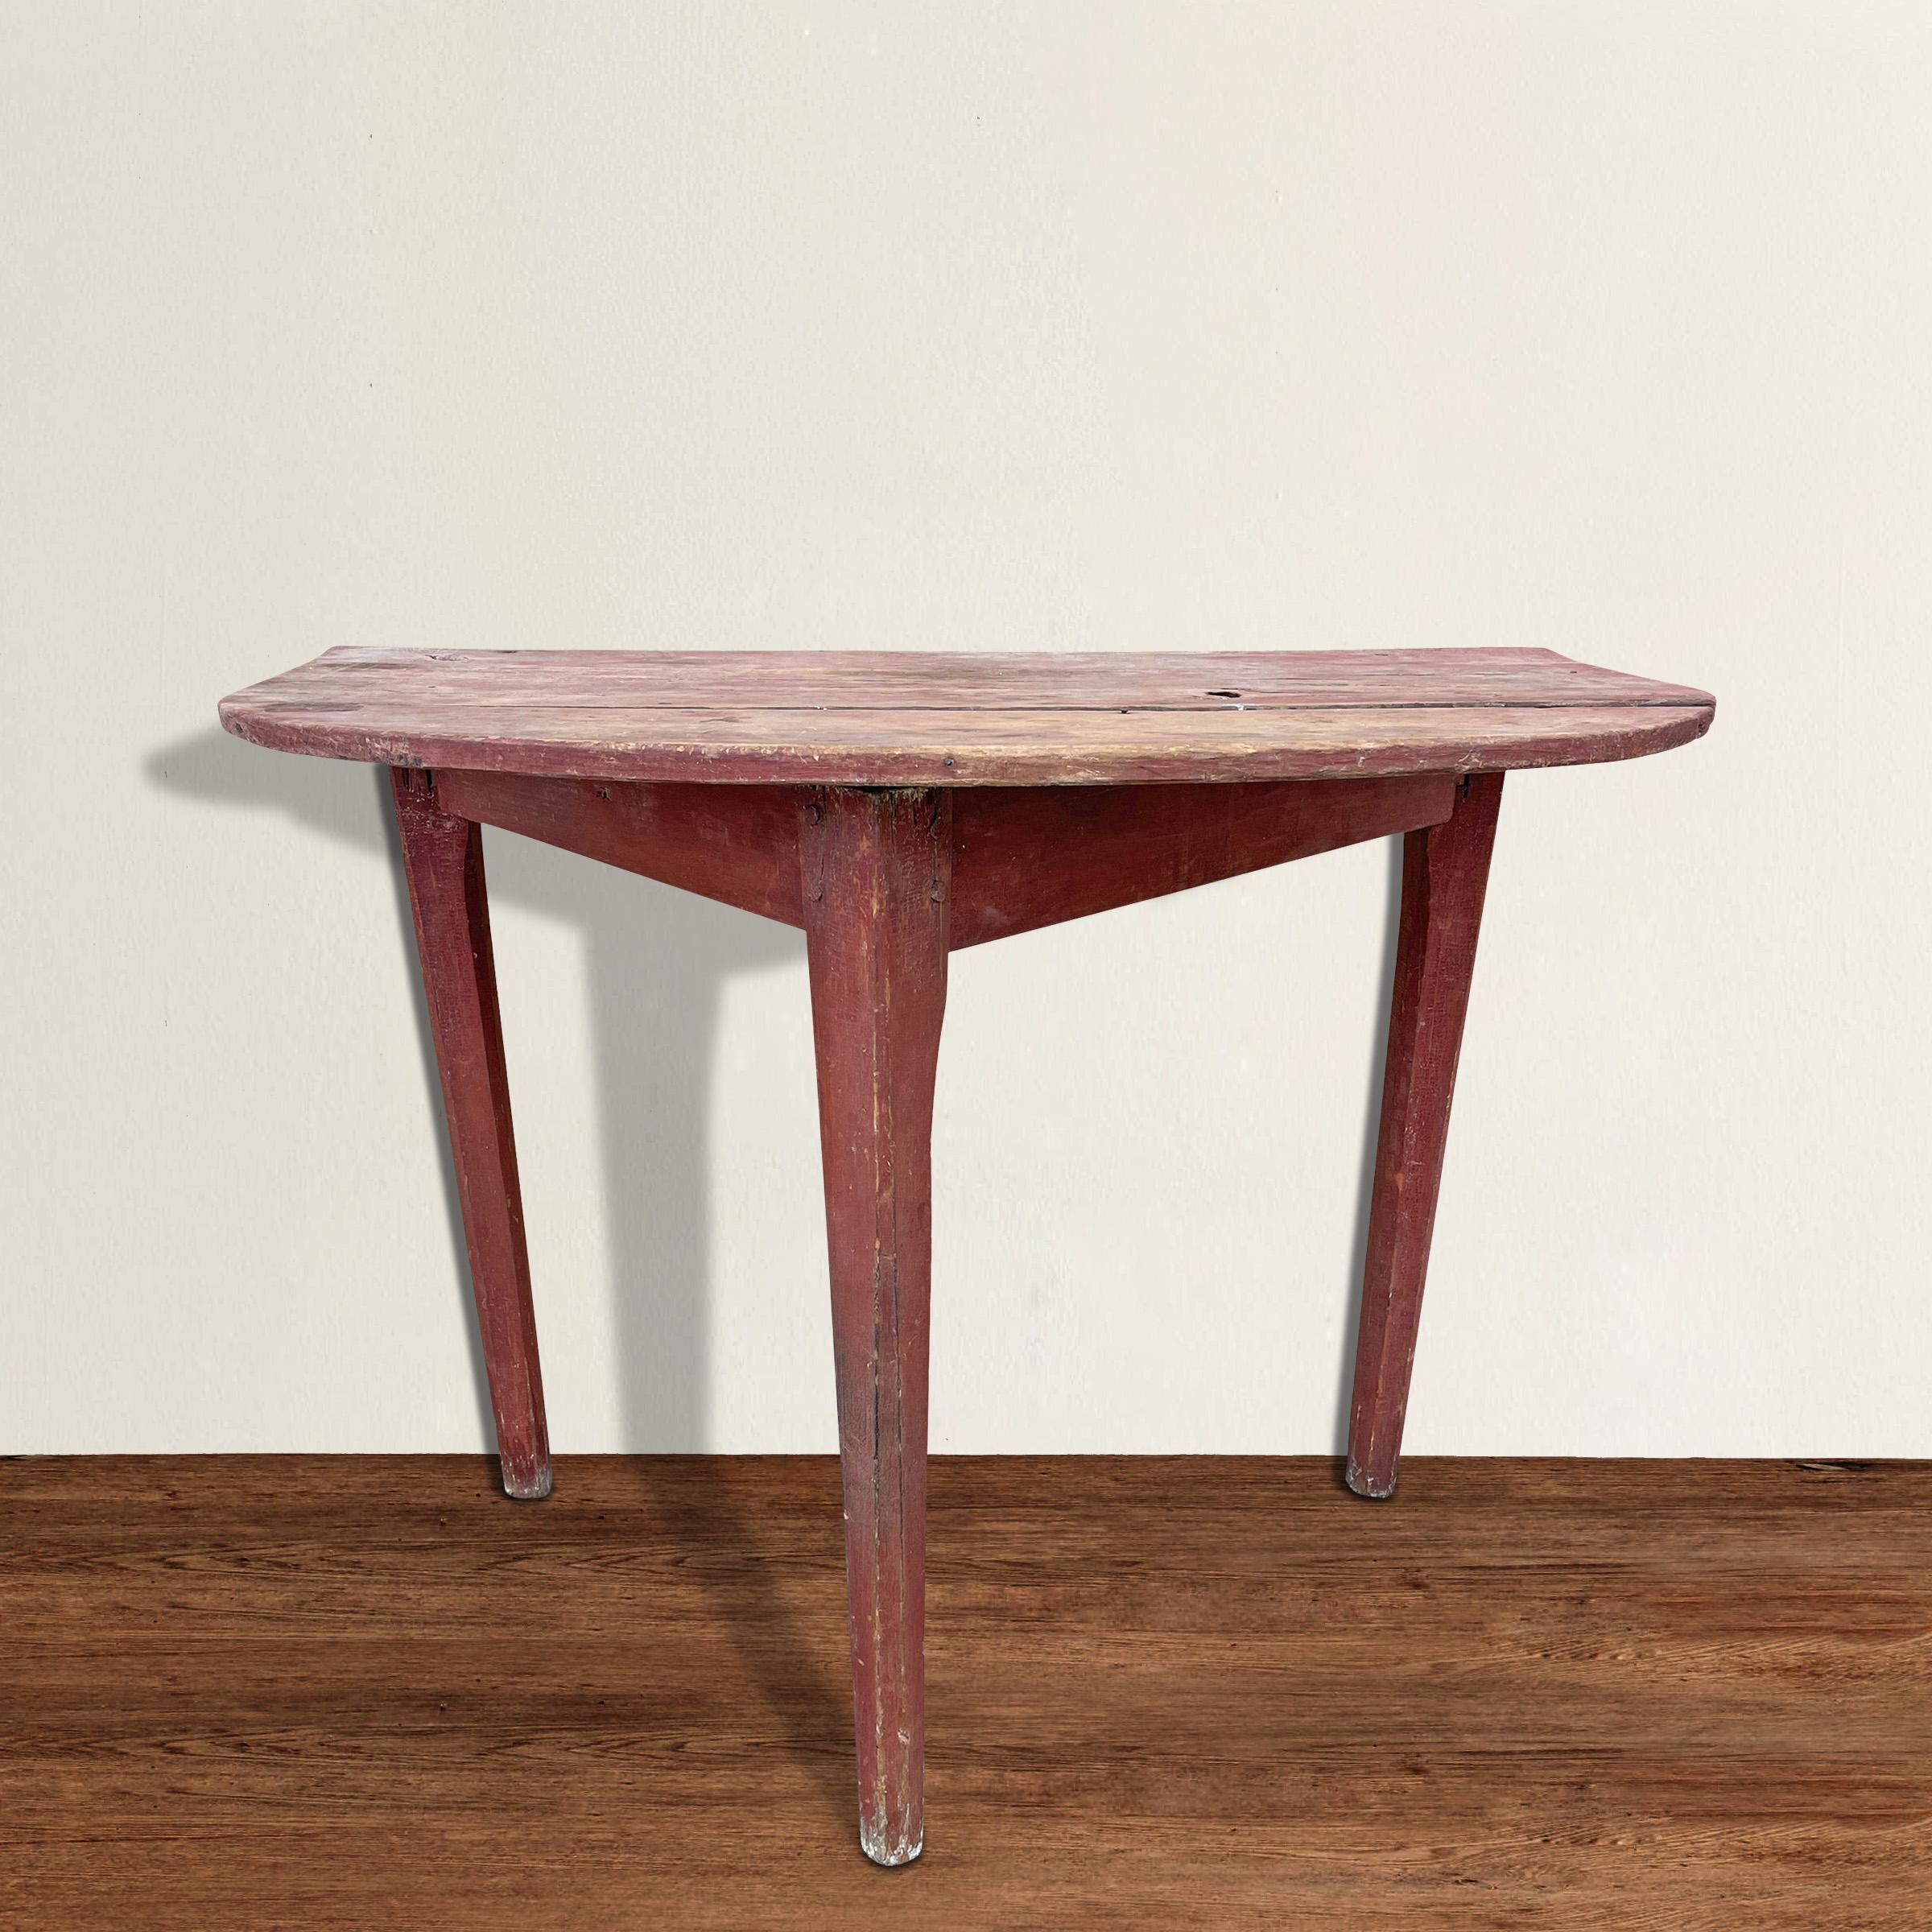 A charming 19th century American pine demilune table with three tapered and chamfered legs with wooden pegs, asymmetrically positioned, and retaining its original red paint. The top is semi-circular with squared off ends. Please note that the center